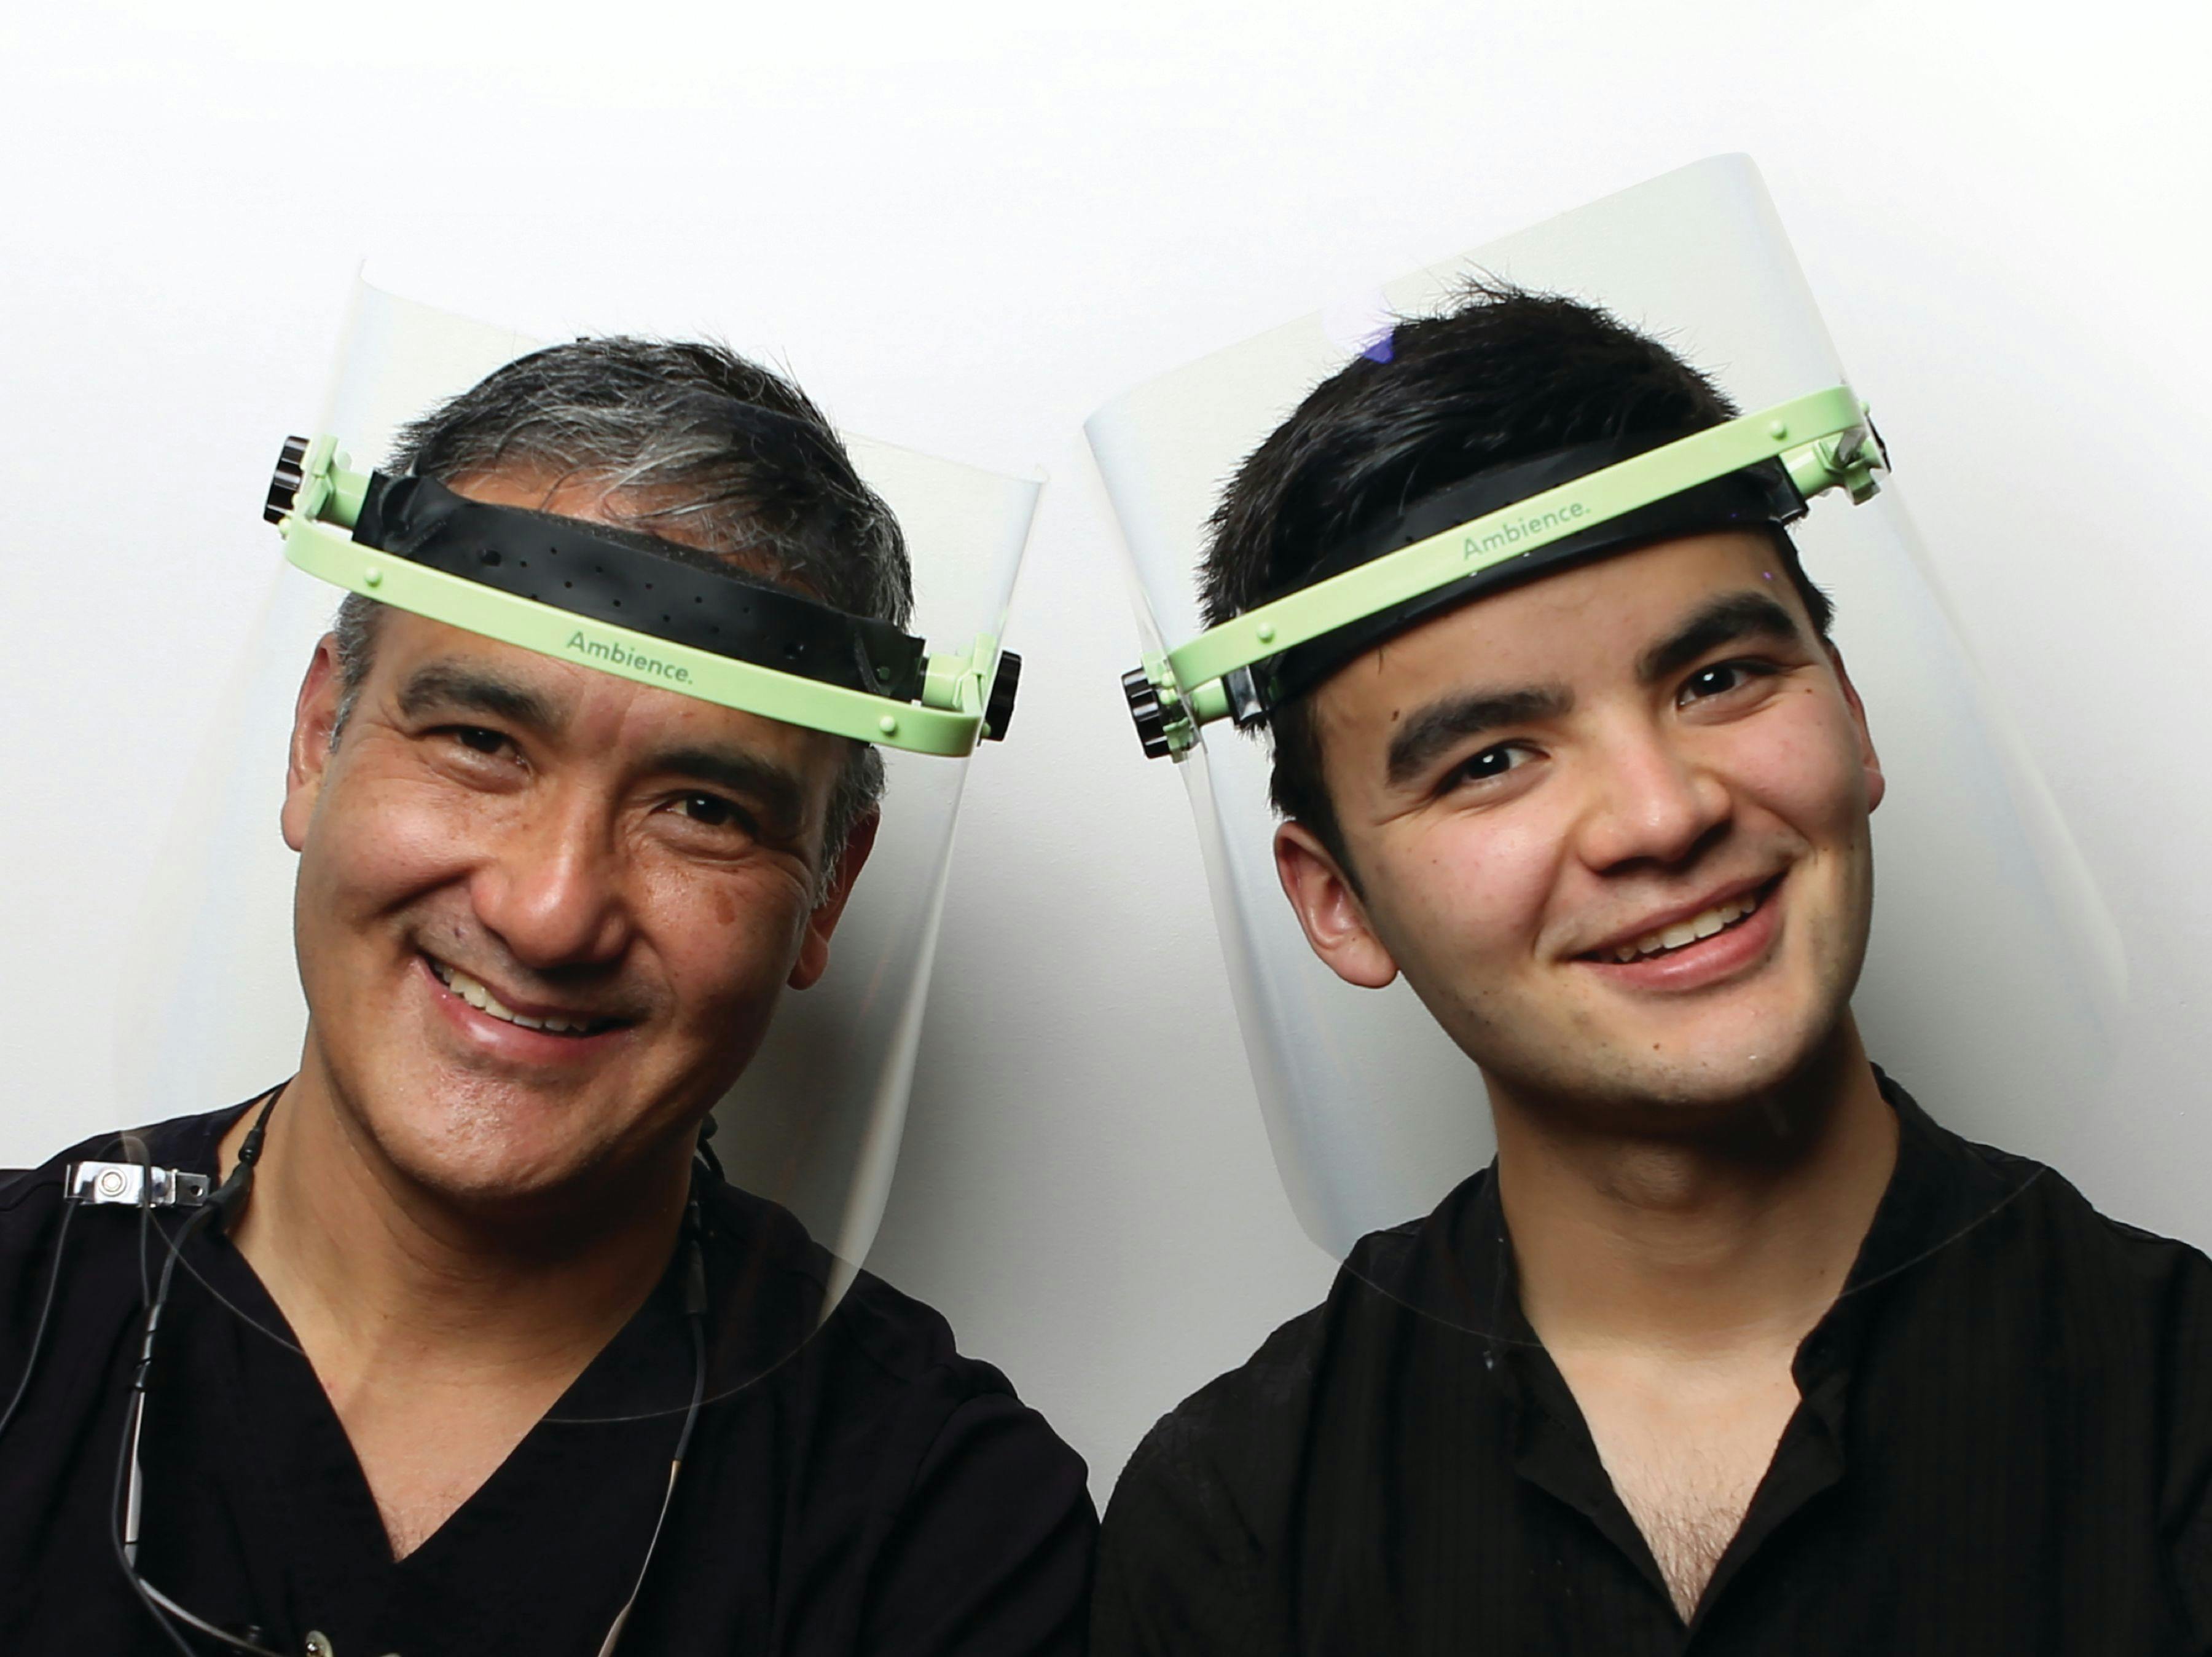 Dr Yamaoka and Zach Yamaoka smile together wearing the AmbiencePPE face shield